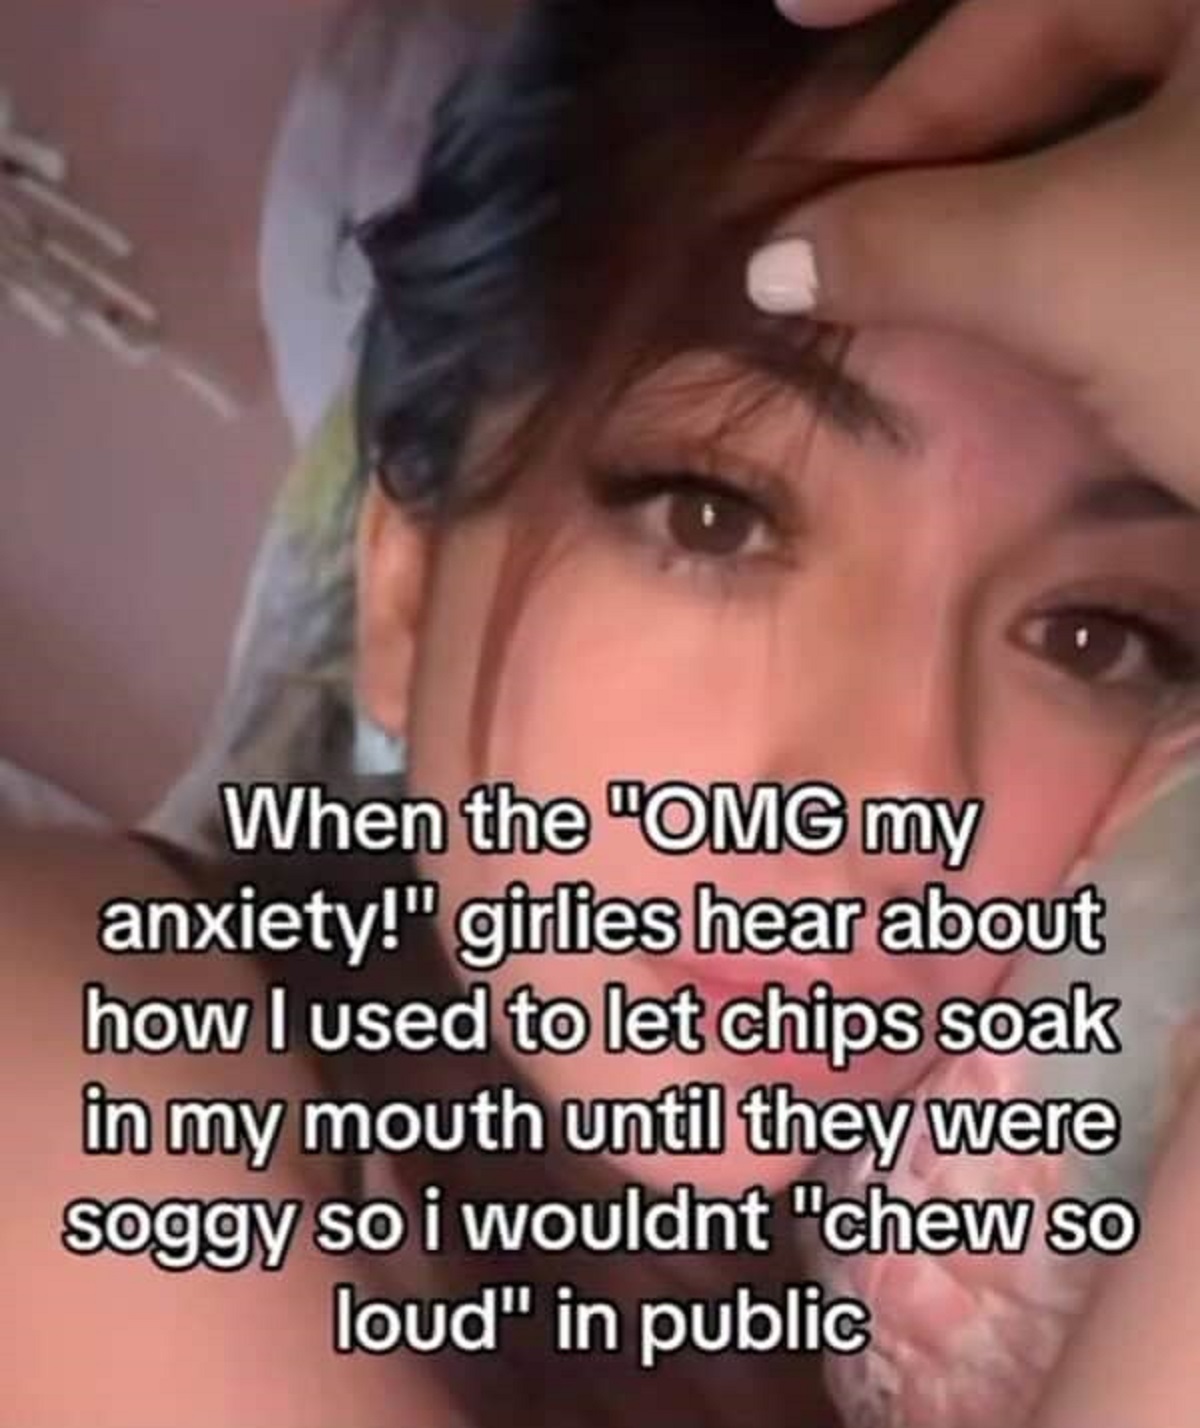 photo caption - When the "Omg my anxiety!" girlies hear about how I used to let chips soak in my mouth until they were soggy so i wouldnt "chew so loud" in public